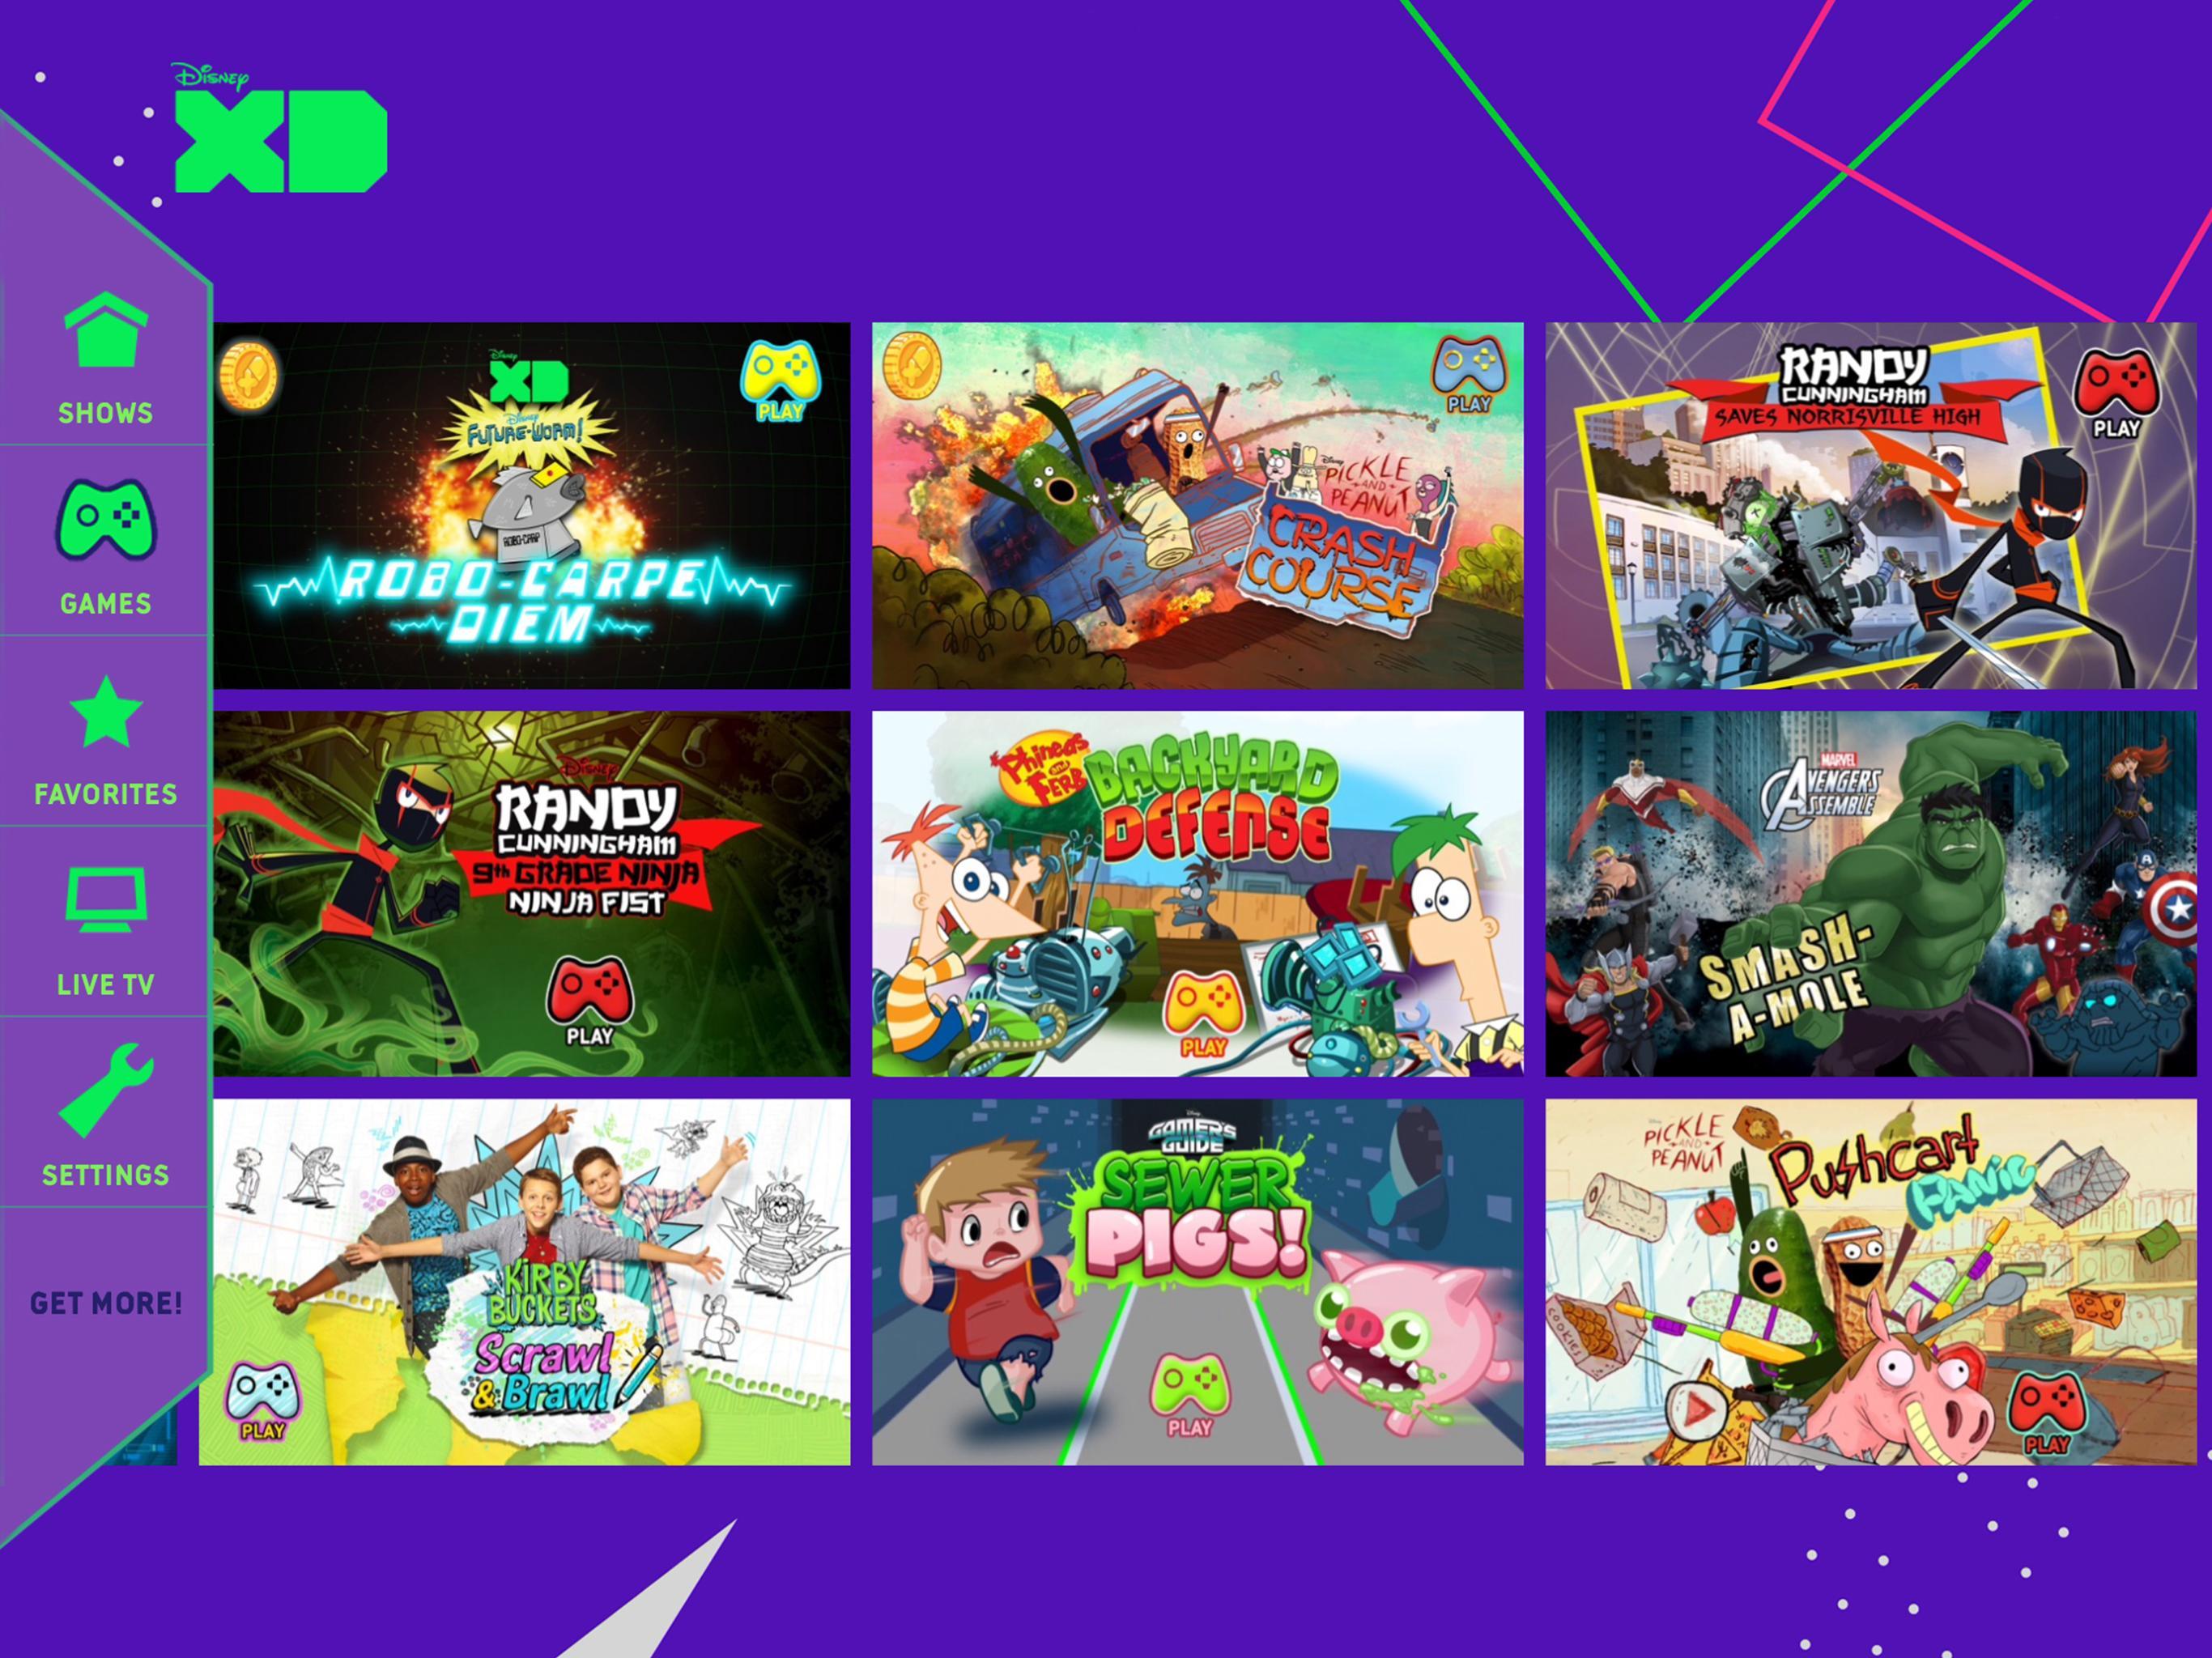 Disney XD for Android - APK Download